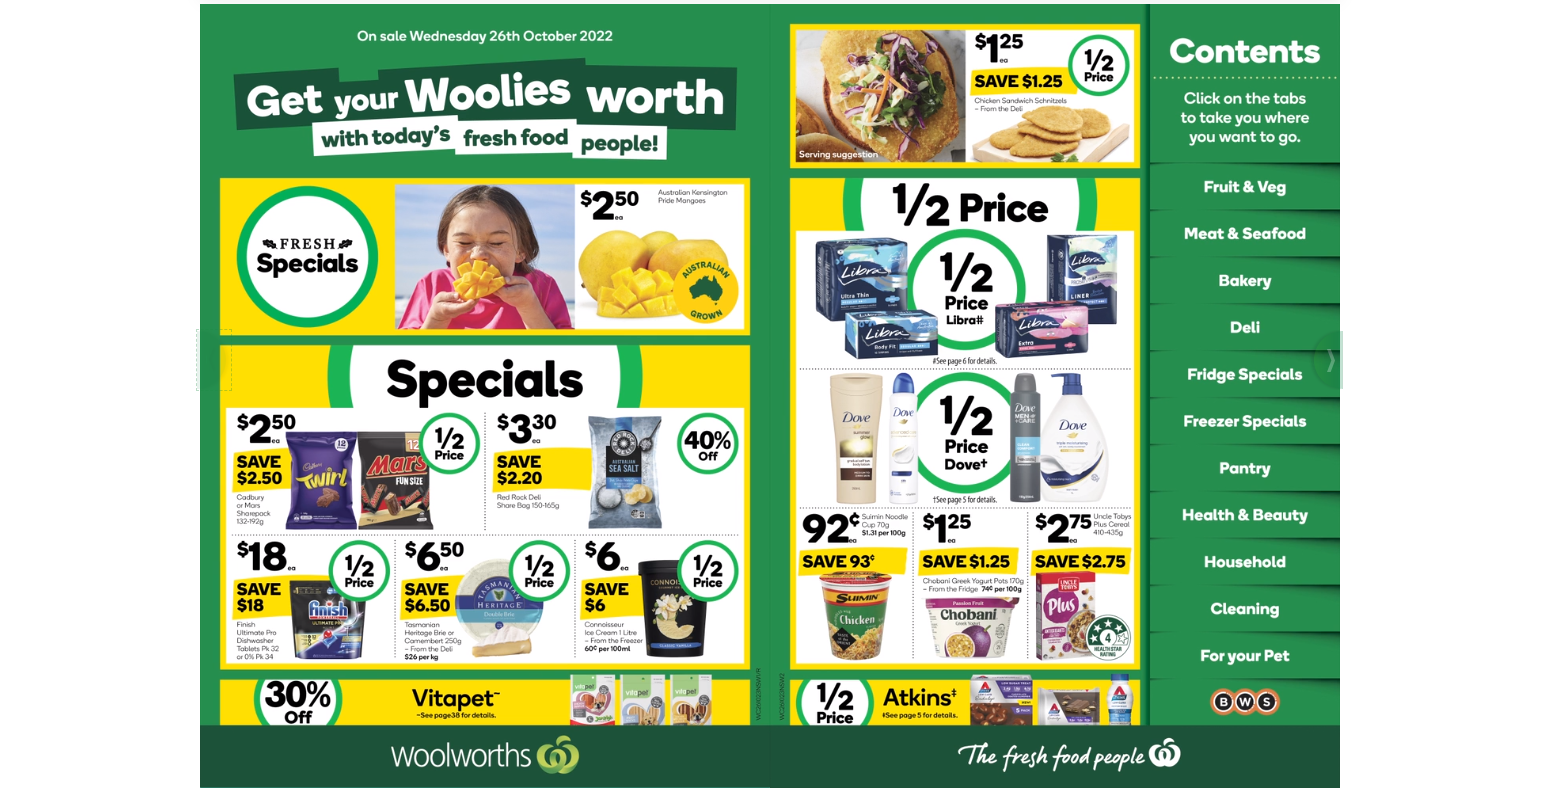 Woolworths Catalogue - 1/2 price on Dove, Libra, Atkins, Cheezels, 30% OFF Vitapet [from 26th Oct]